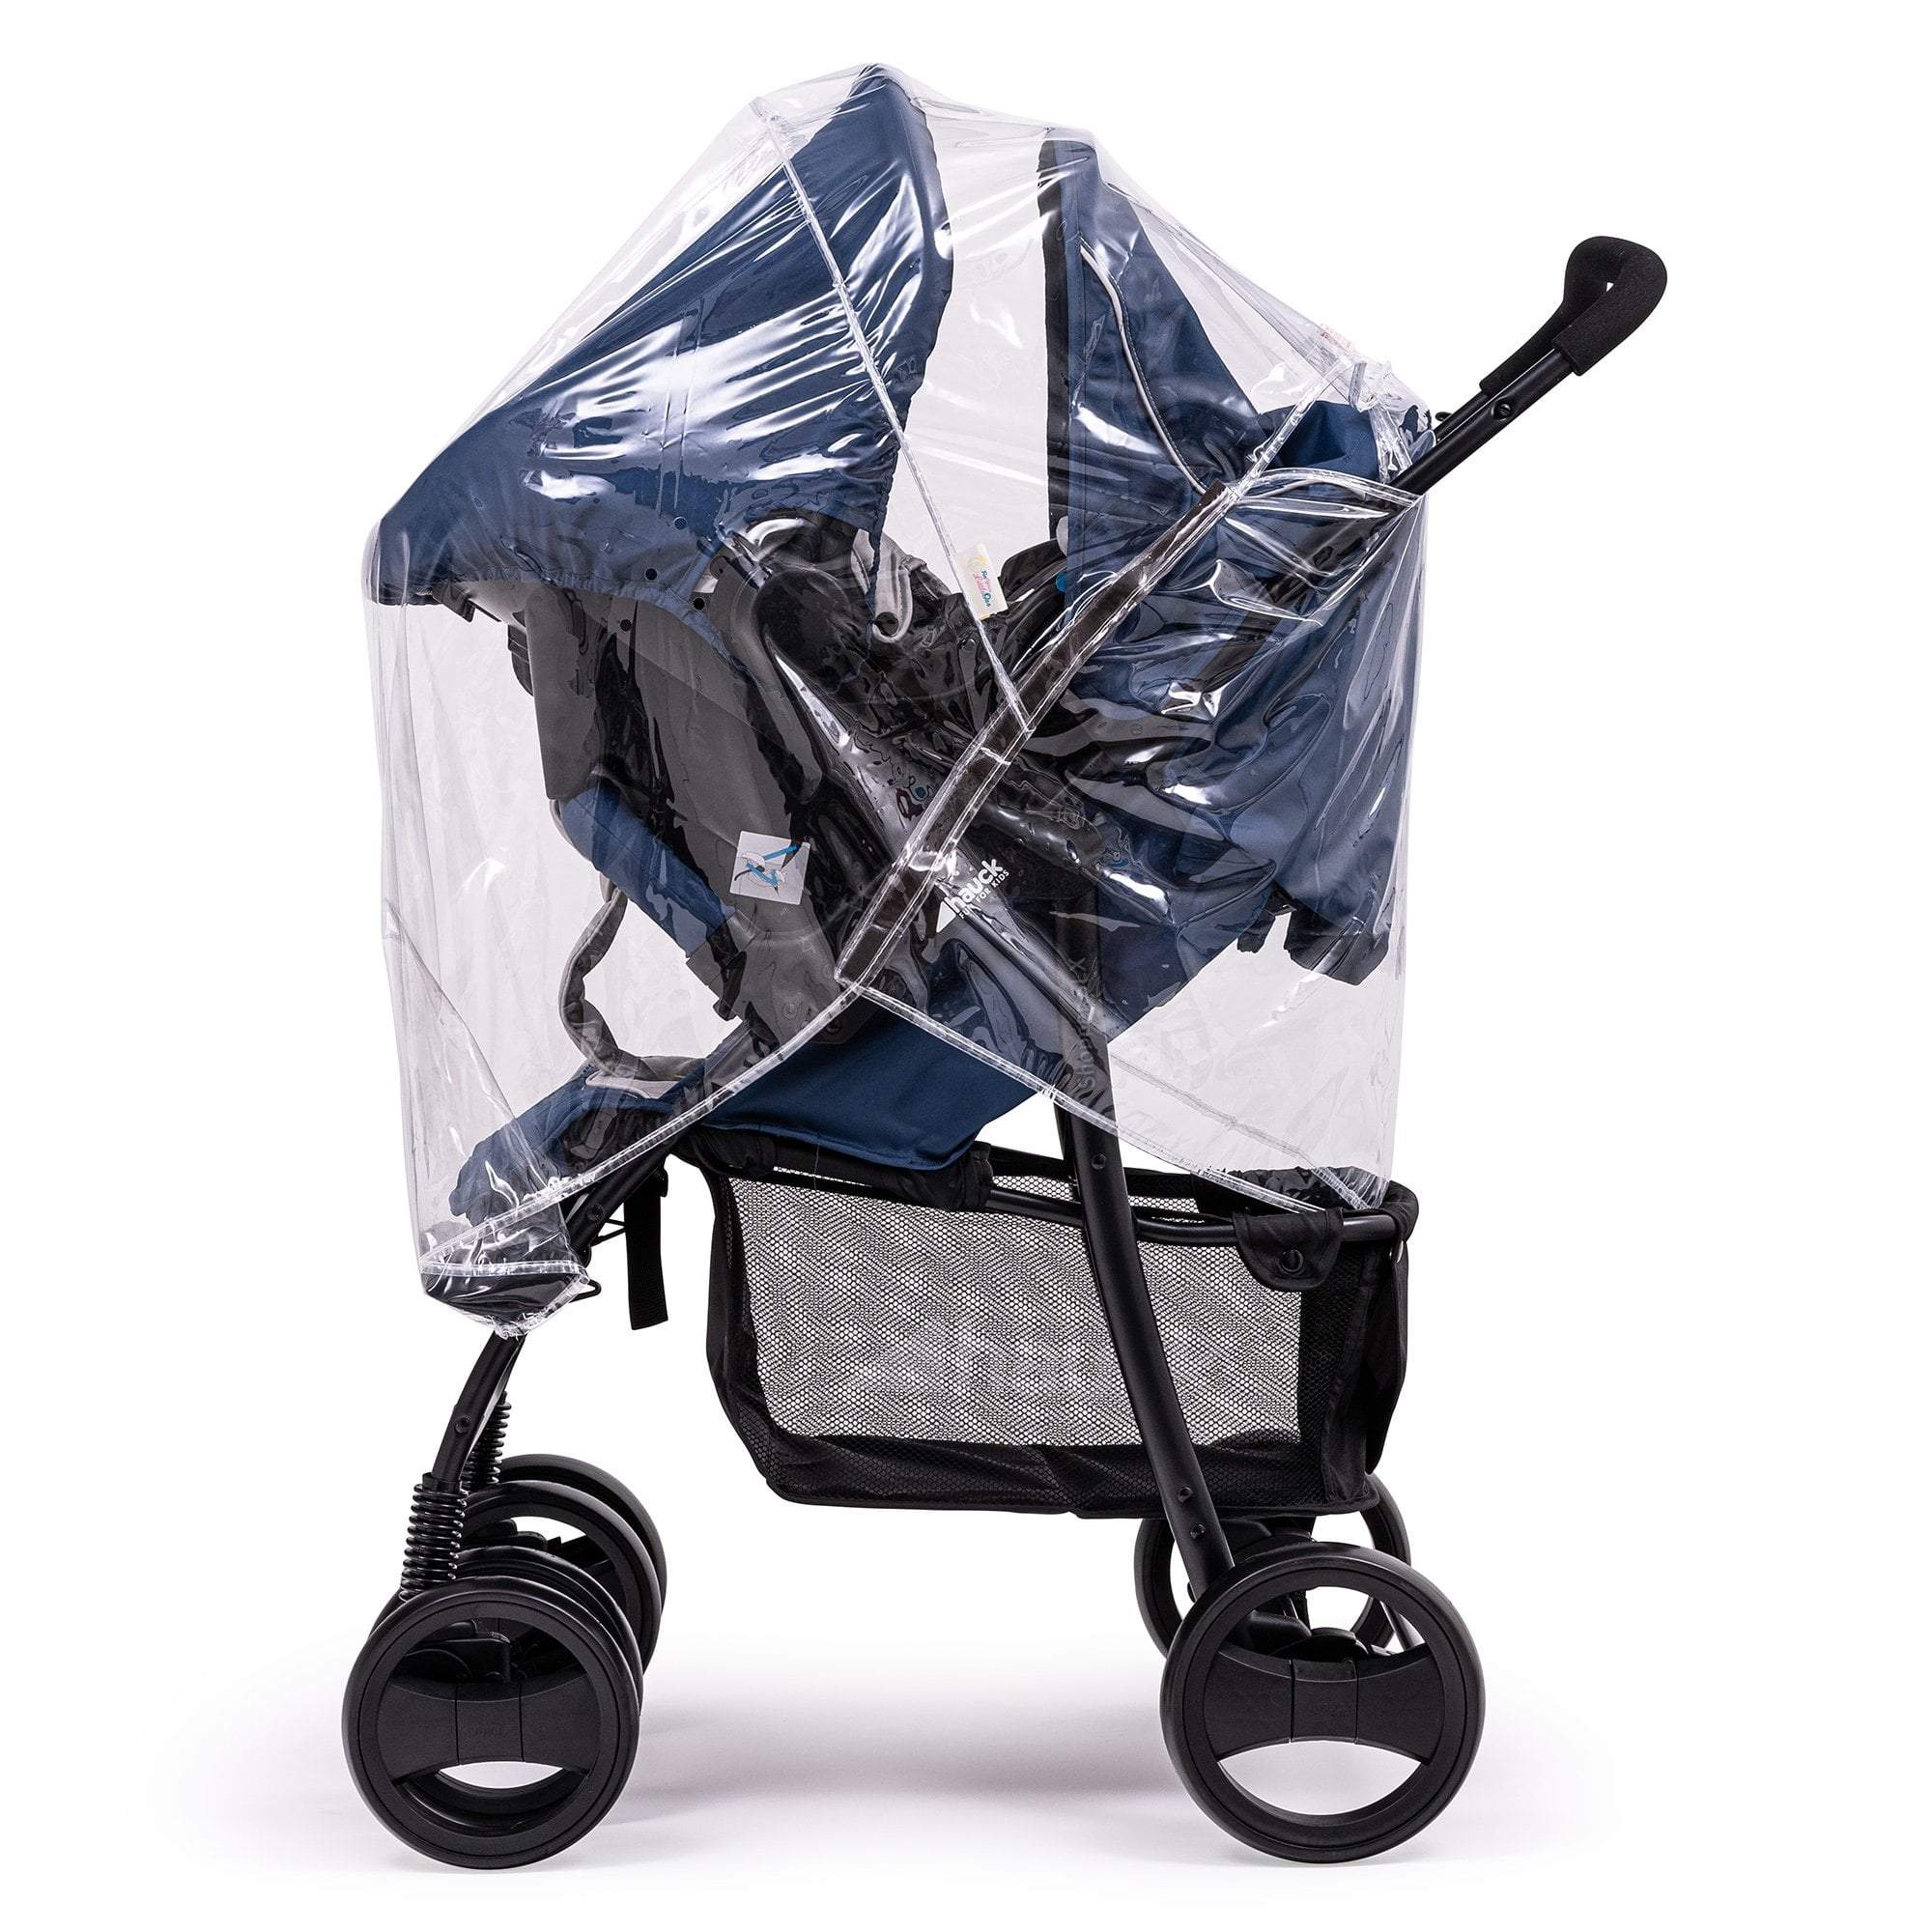 Travel System Raincover Compatible with Graco - Fits All Models - For Your Little One